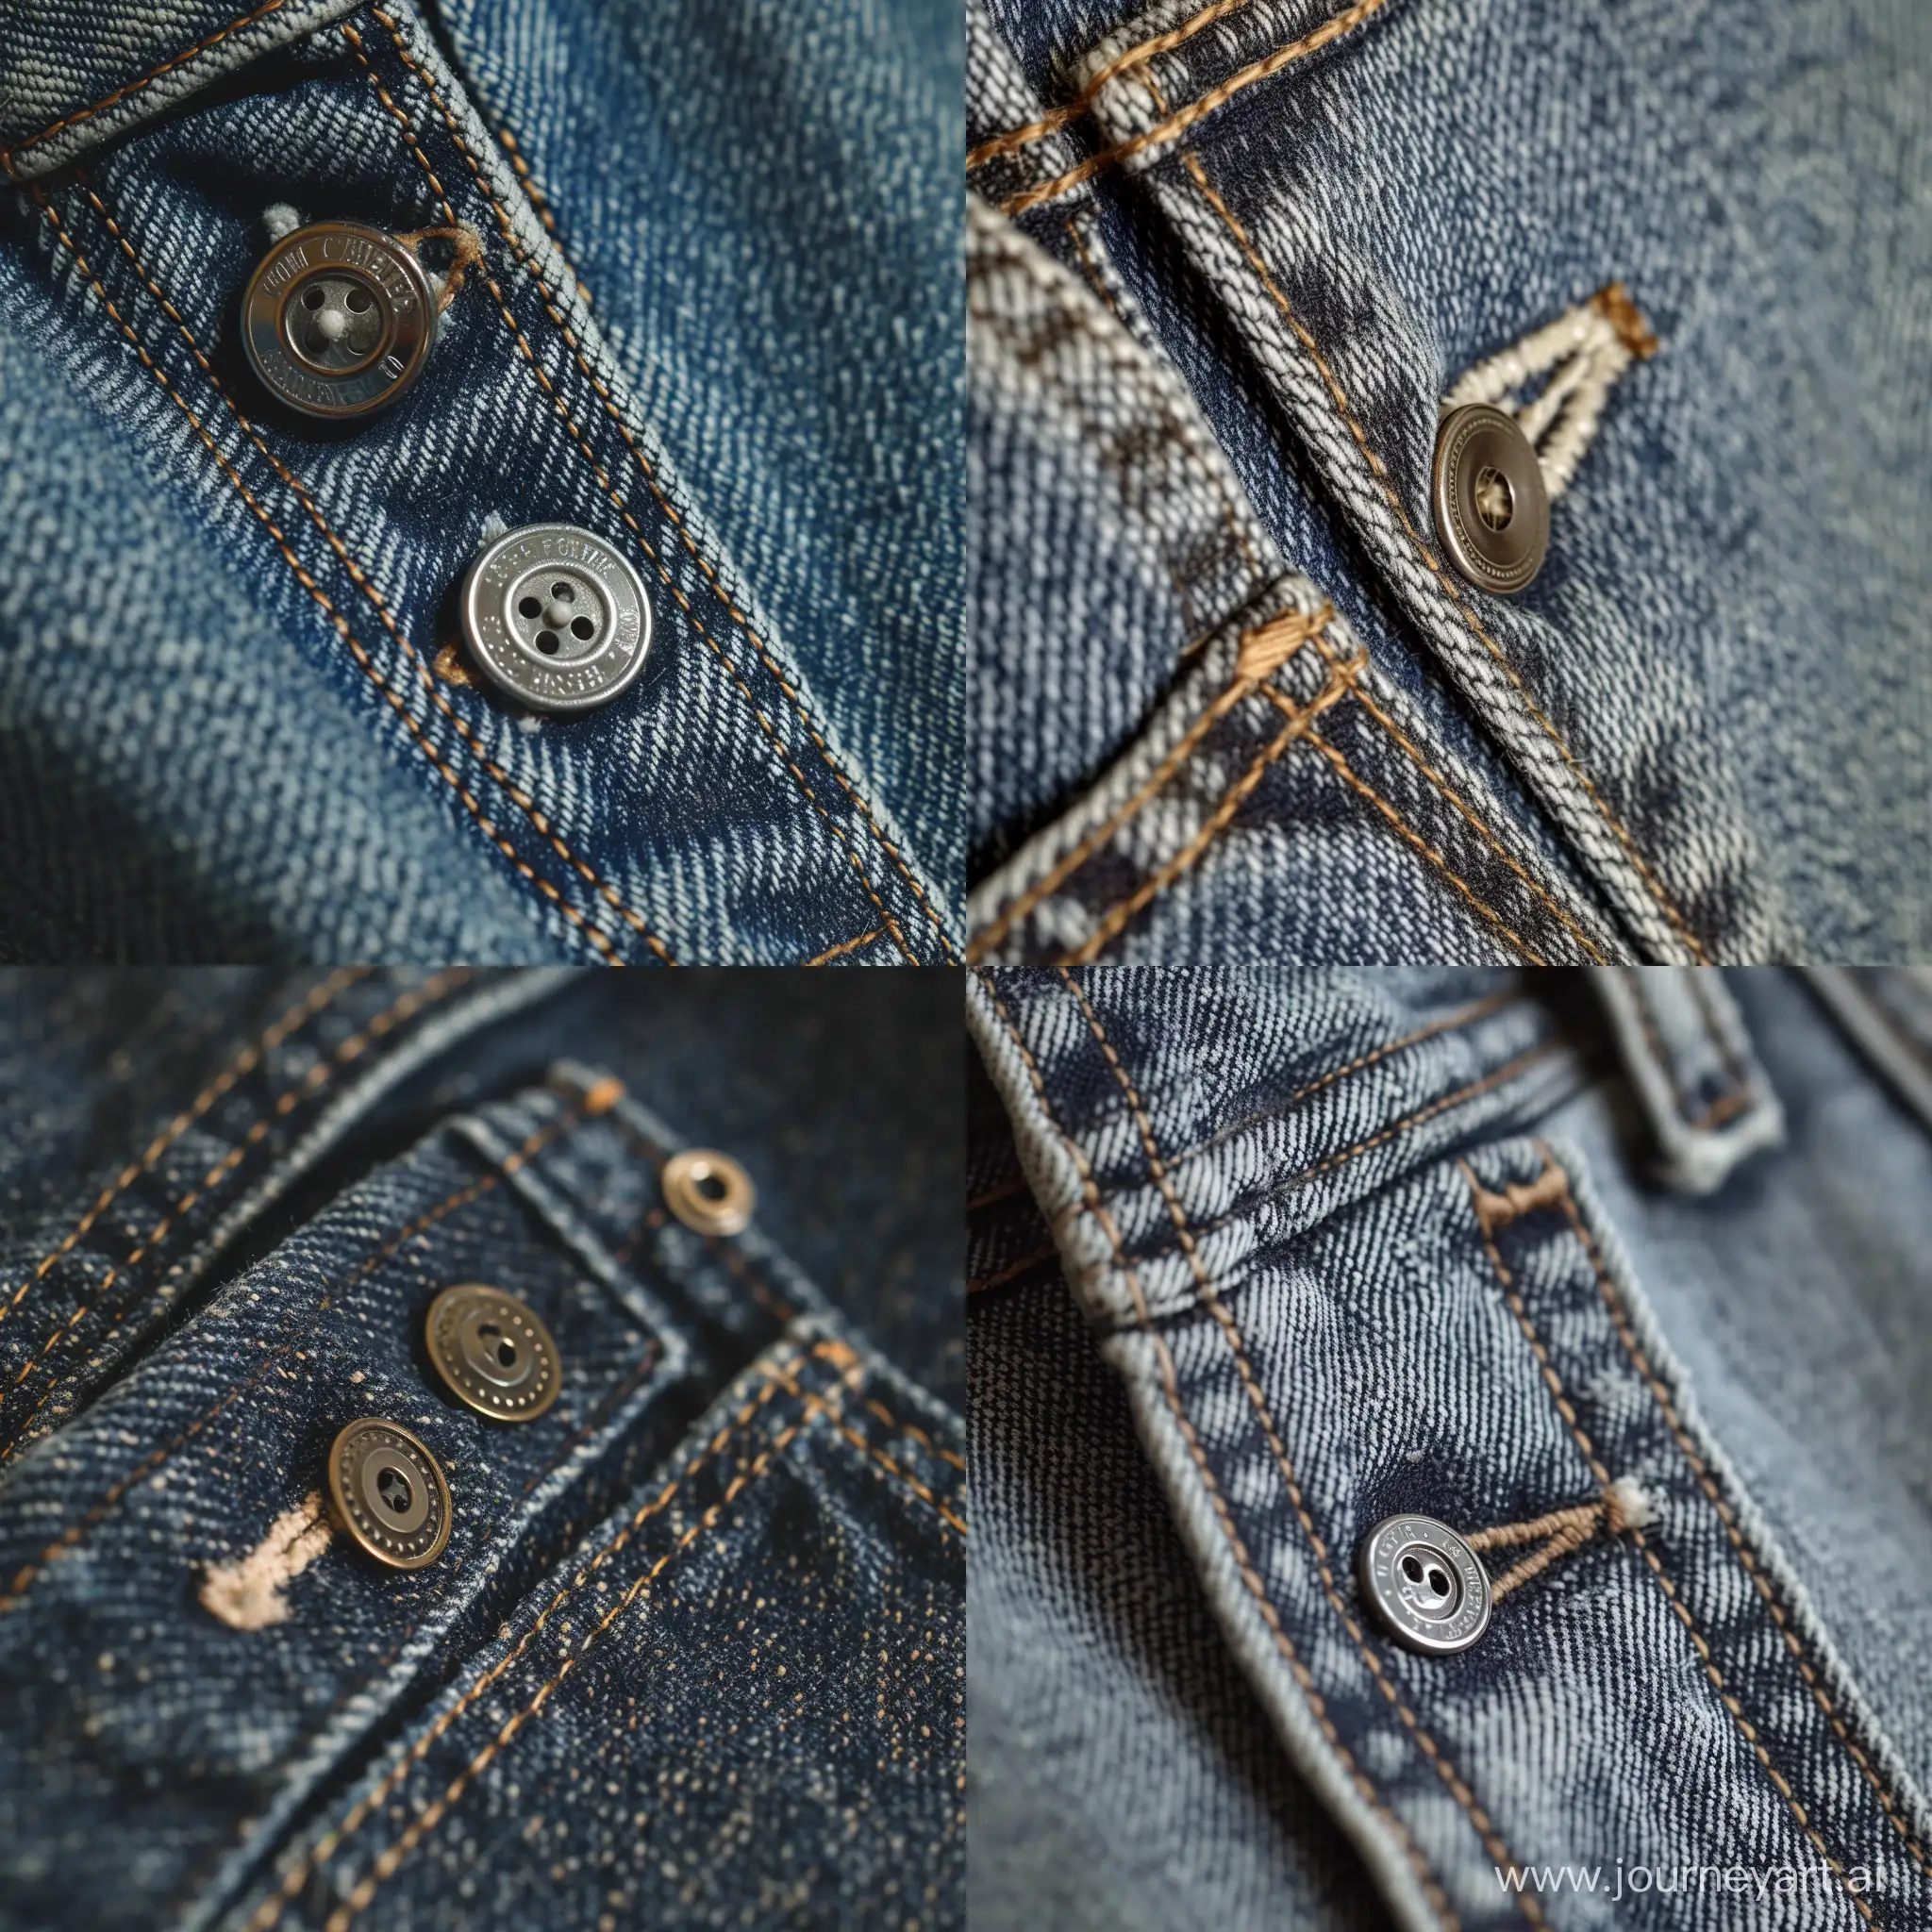 Exquisite-Button-Fastening-Detail-on-Jeans-Vintage-Style-Fashion-Photography